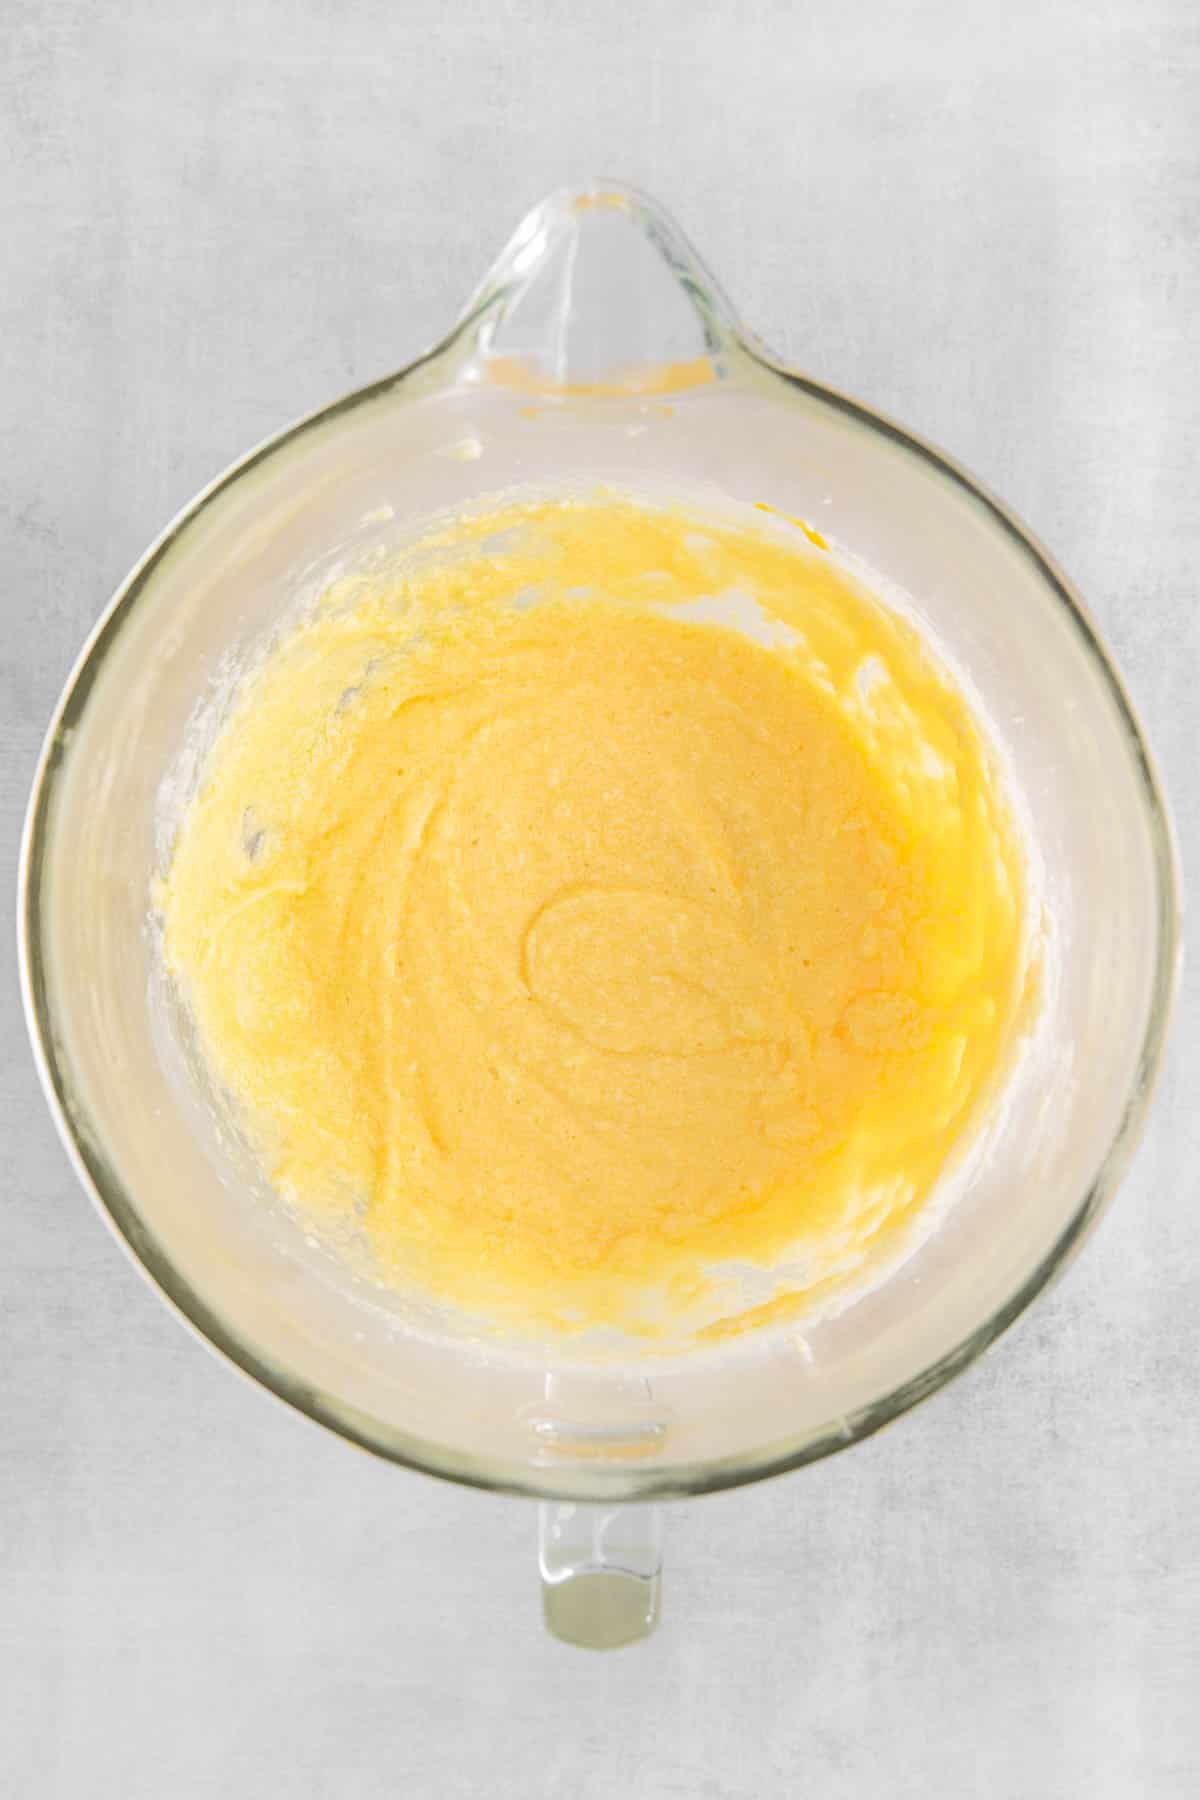 Eggs and vanilla added to butter and sugar mixture in a glass bowl.